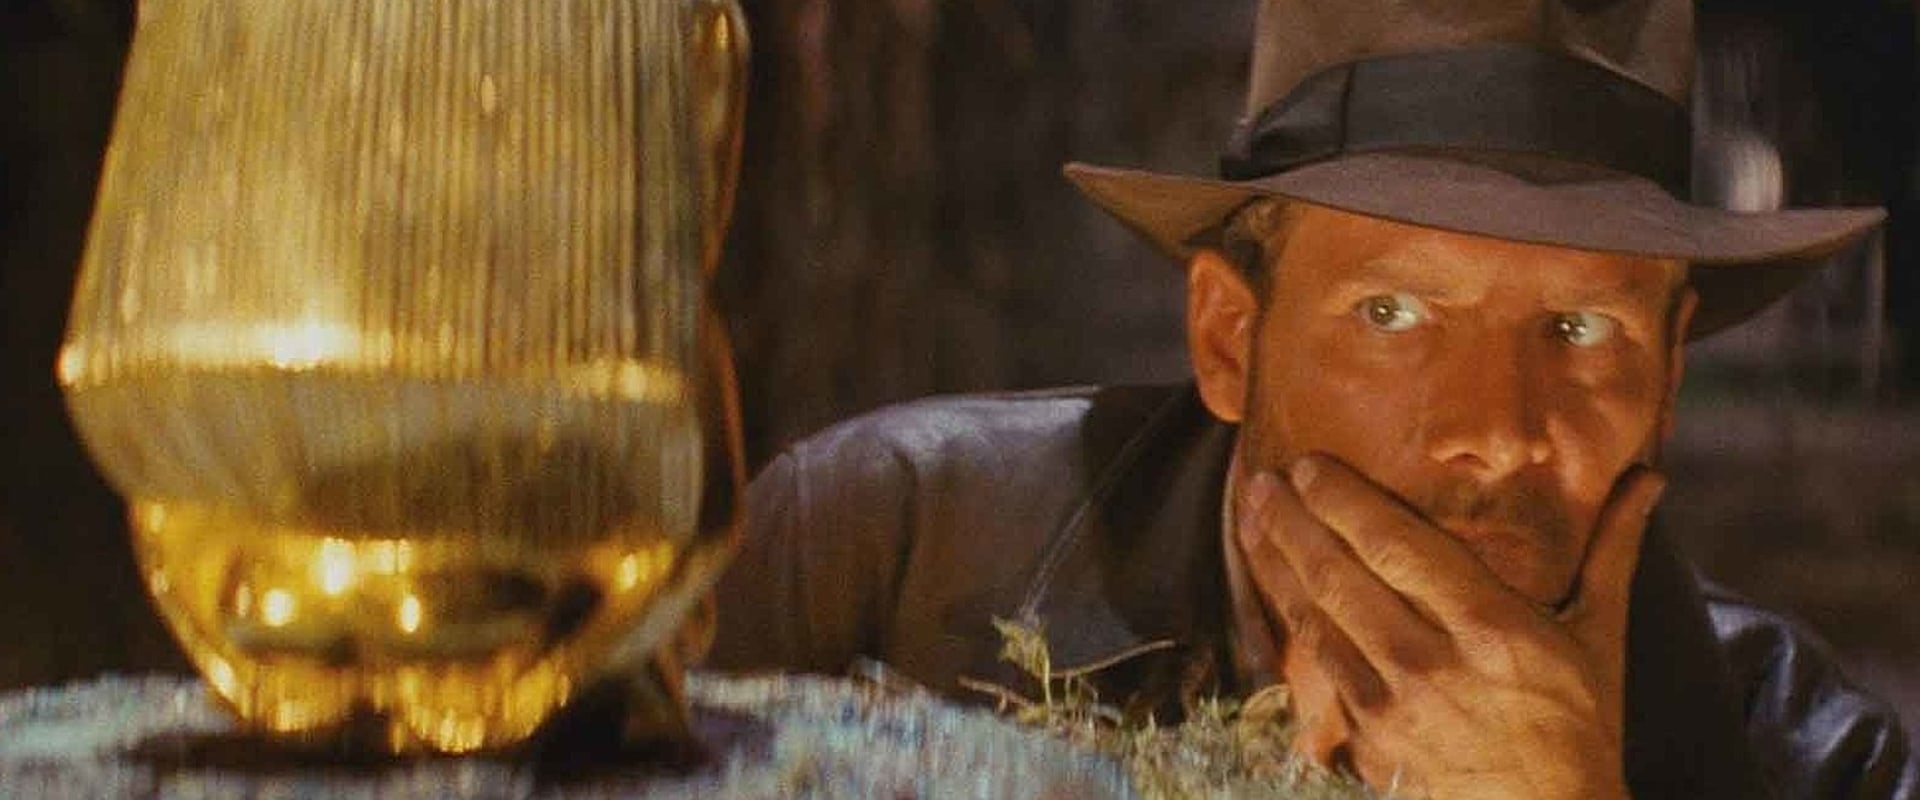 How much would the boulder in indiana jones weigh?